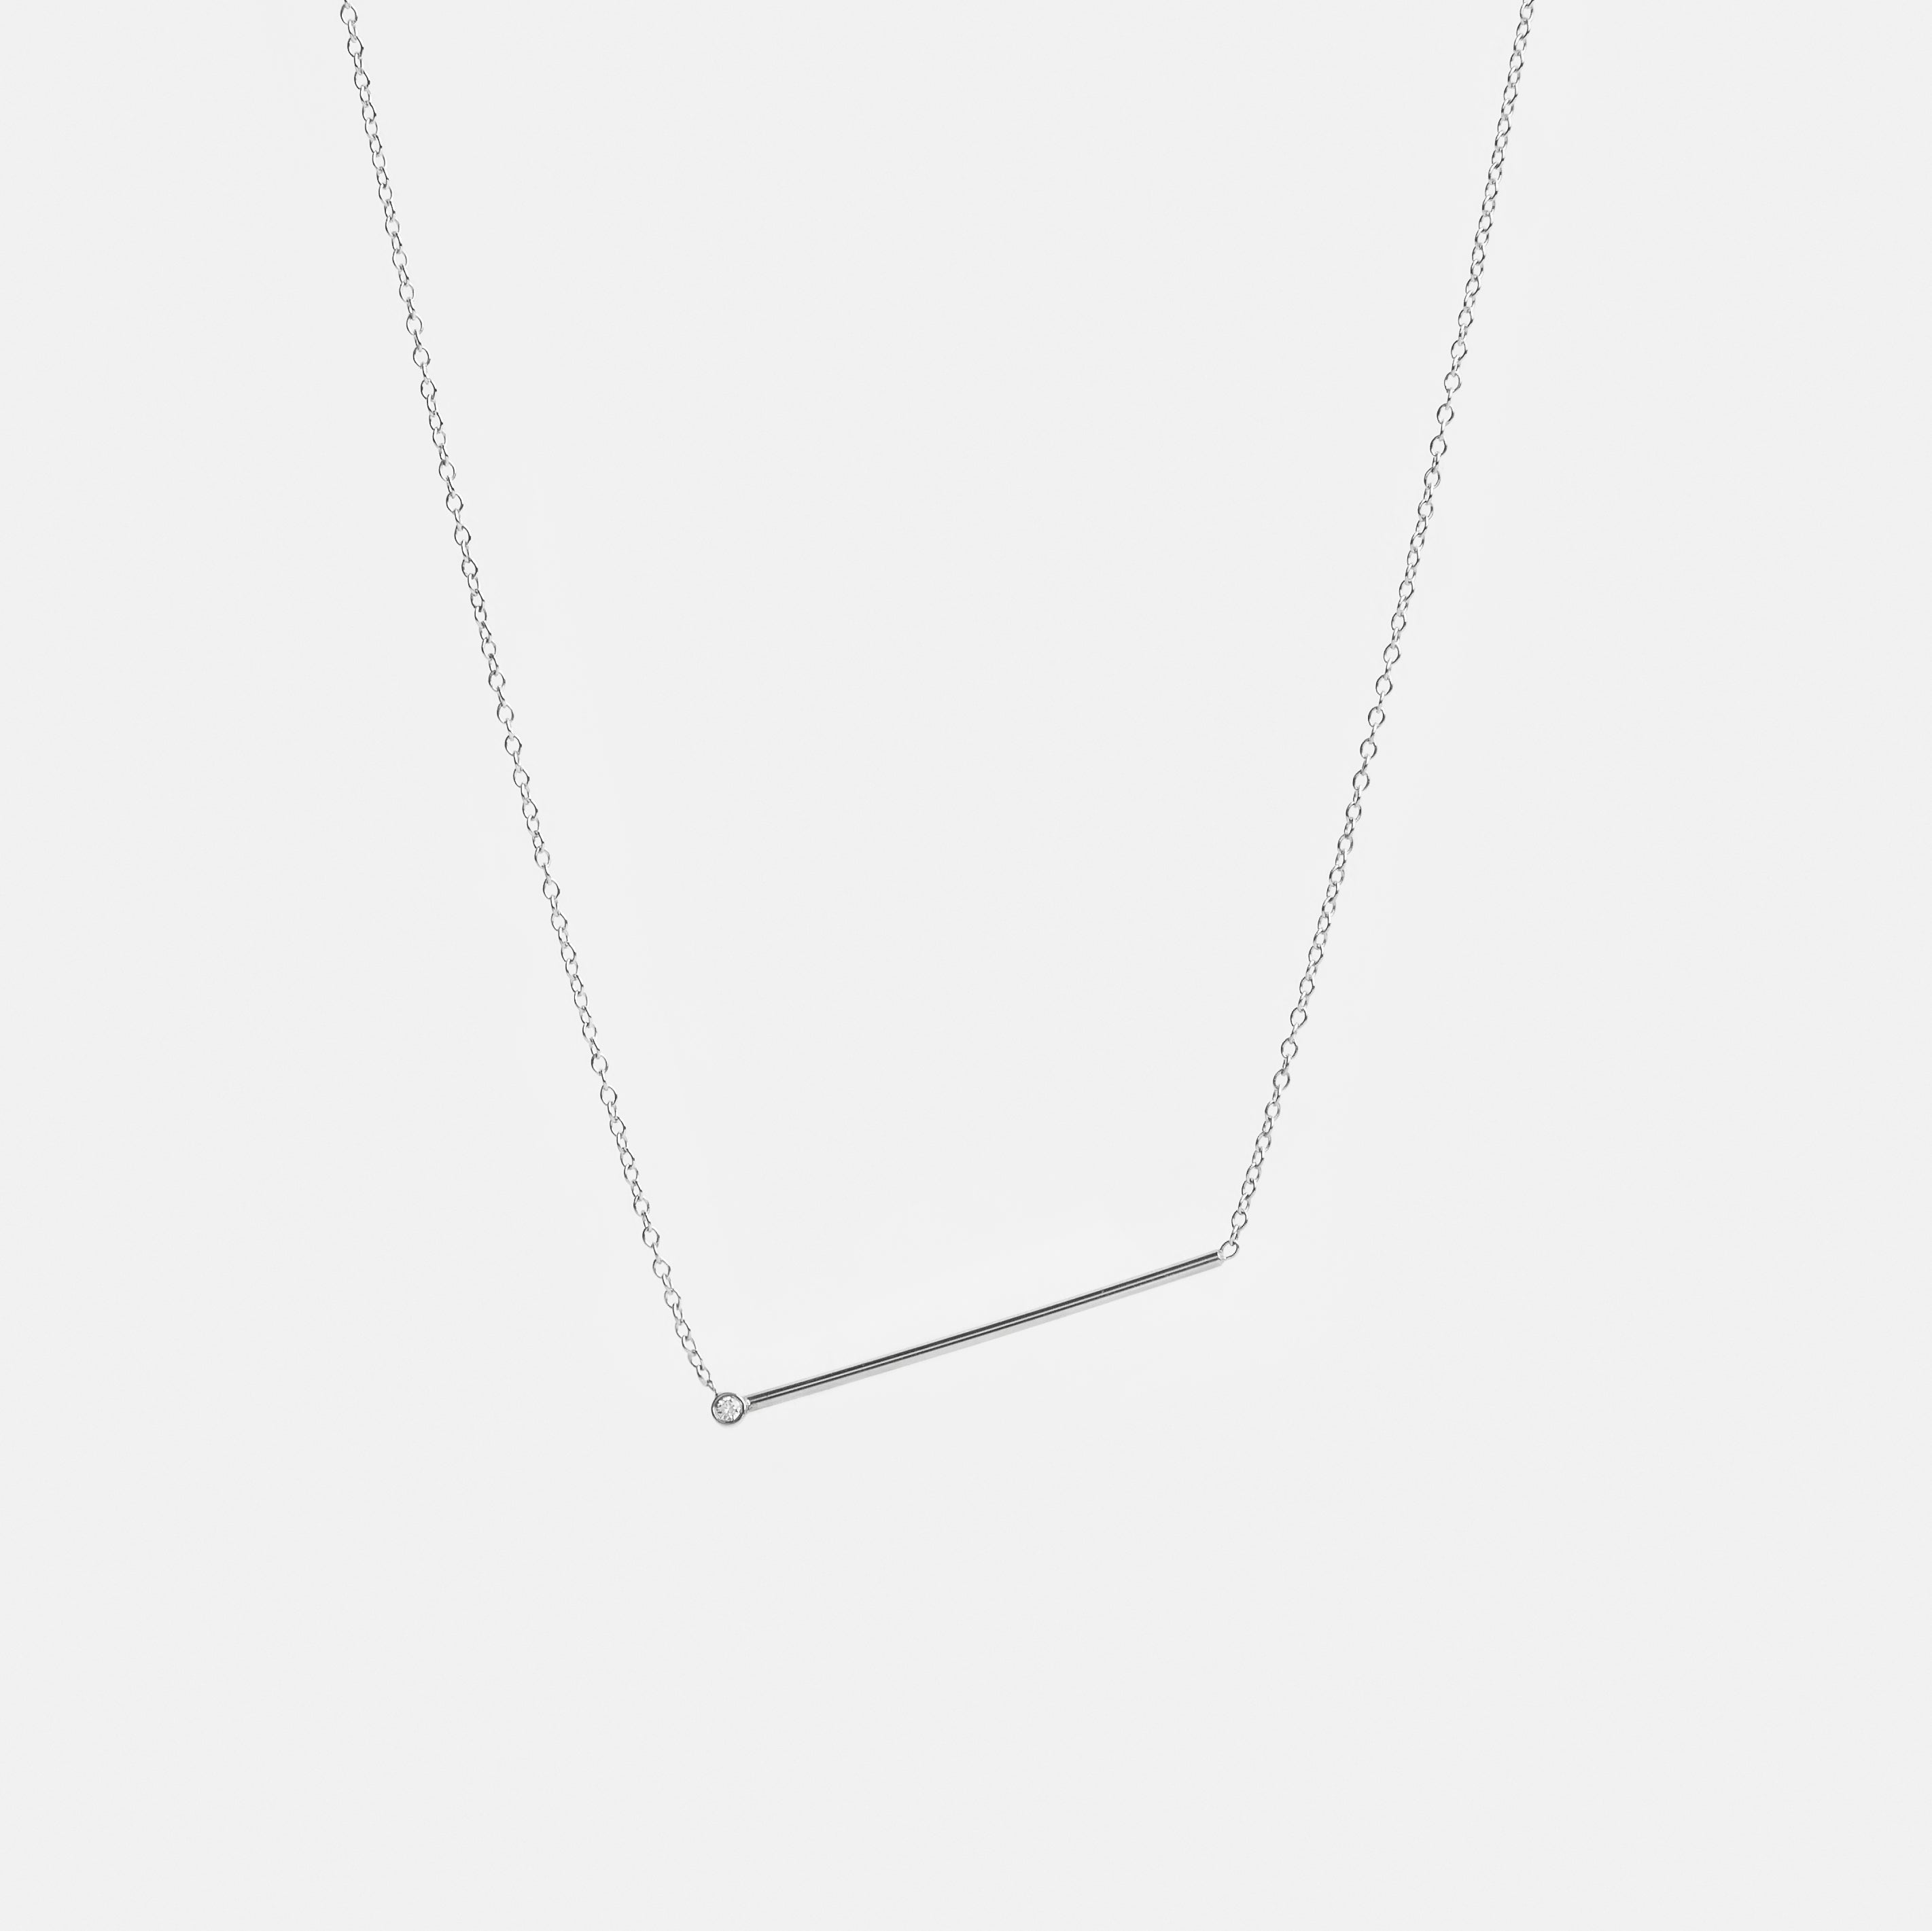 Enne Unusual Necklace in 14k White Gold set with White Diamond By SHW Fine Jewelry NYC